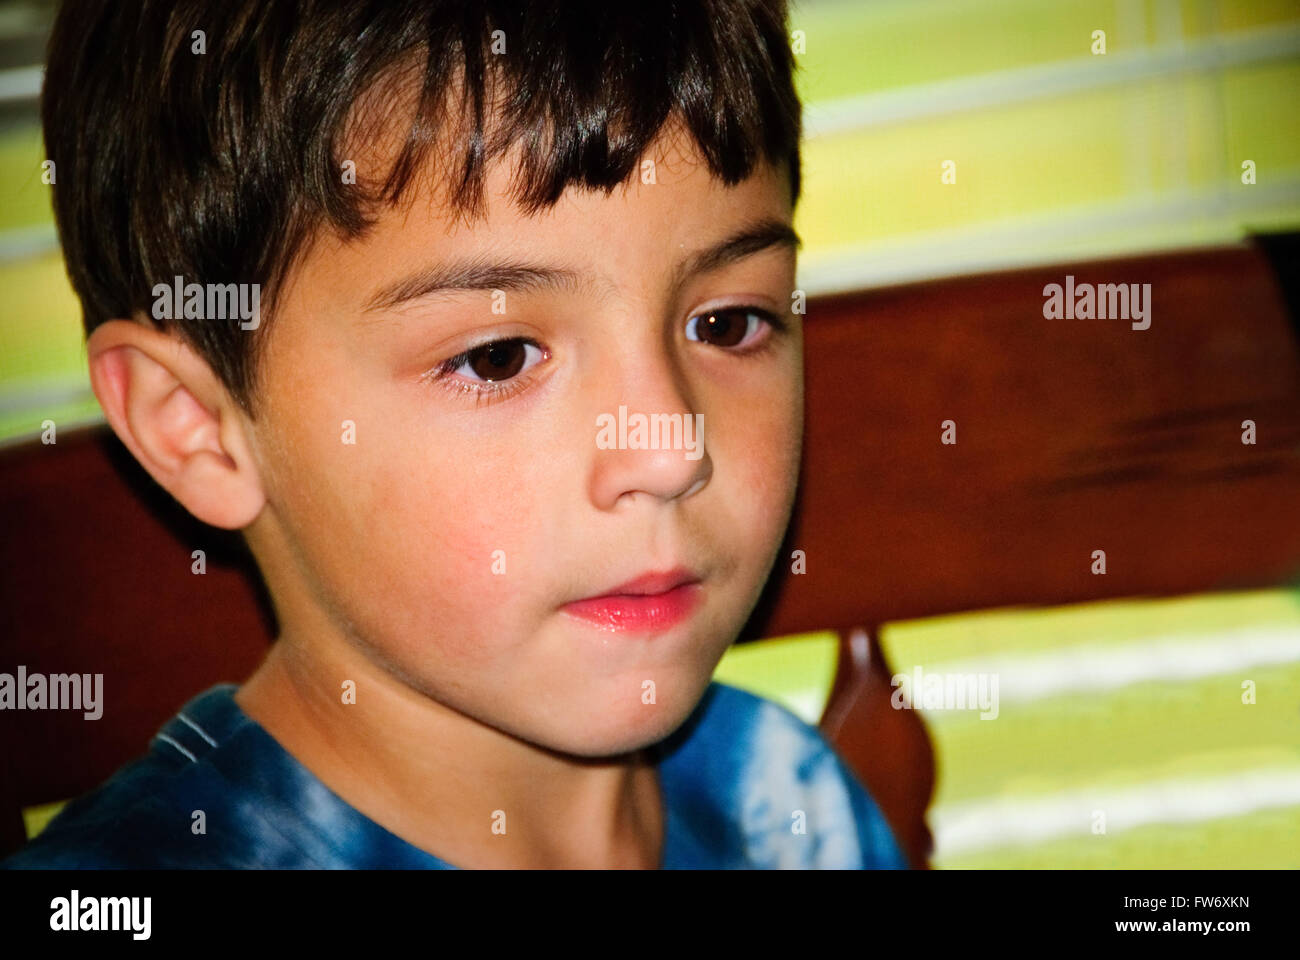 Cute little boy up close with black hair and dark brown eyes looking  serious Stock Photo - Alamy